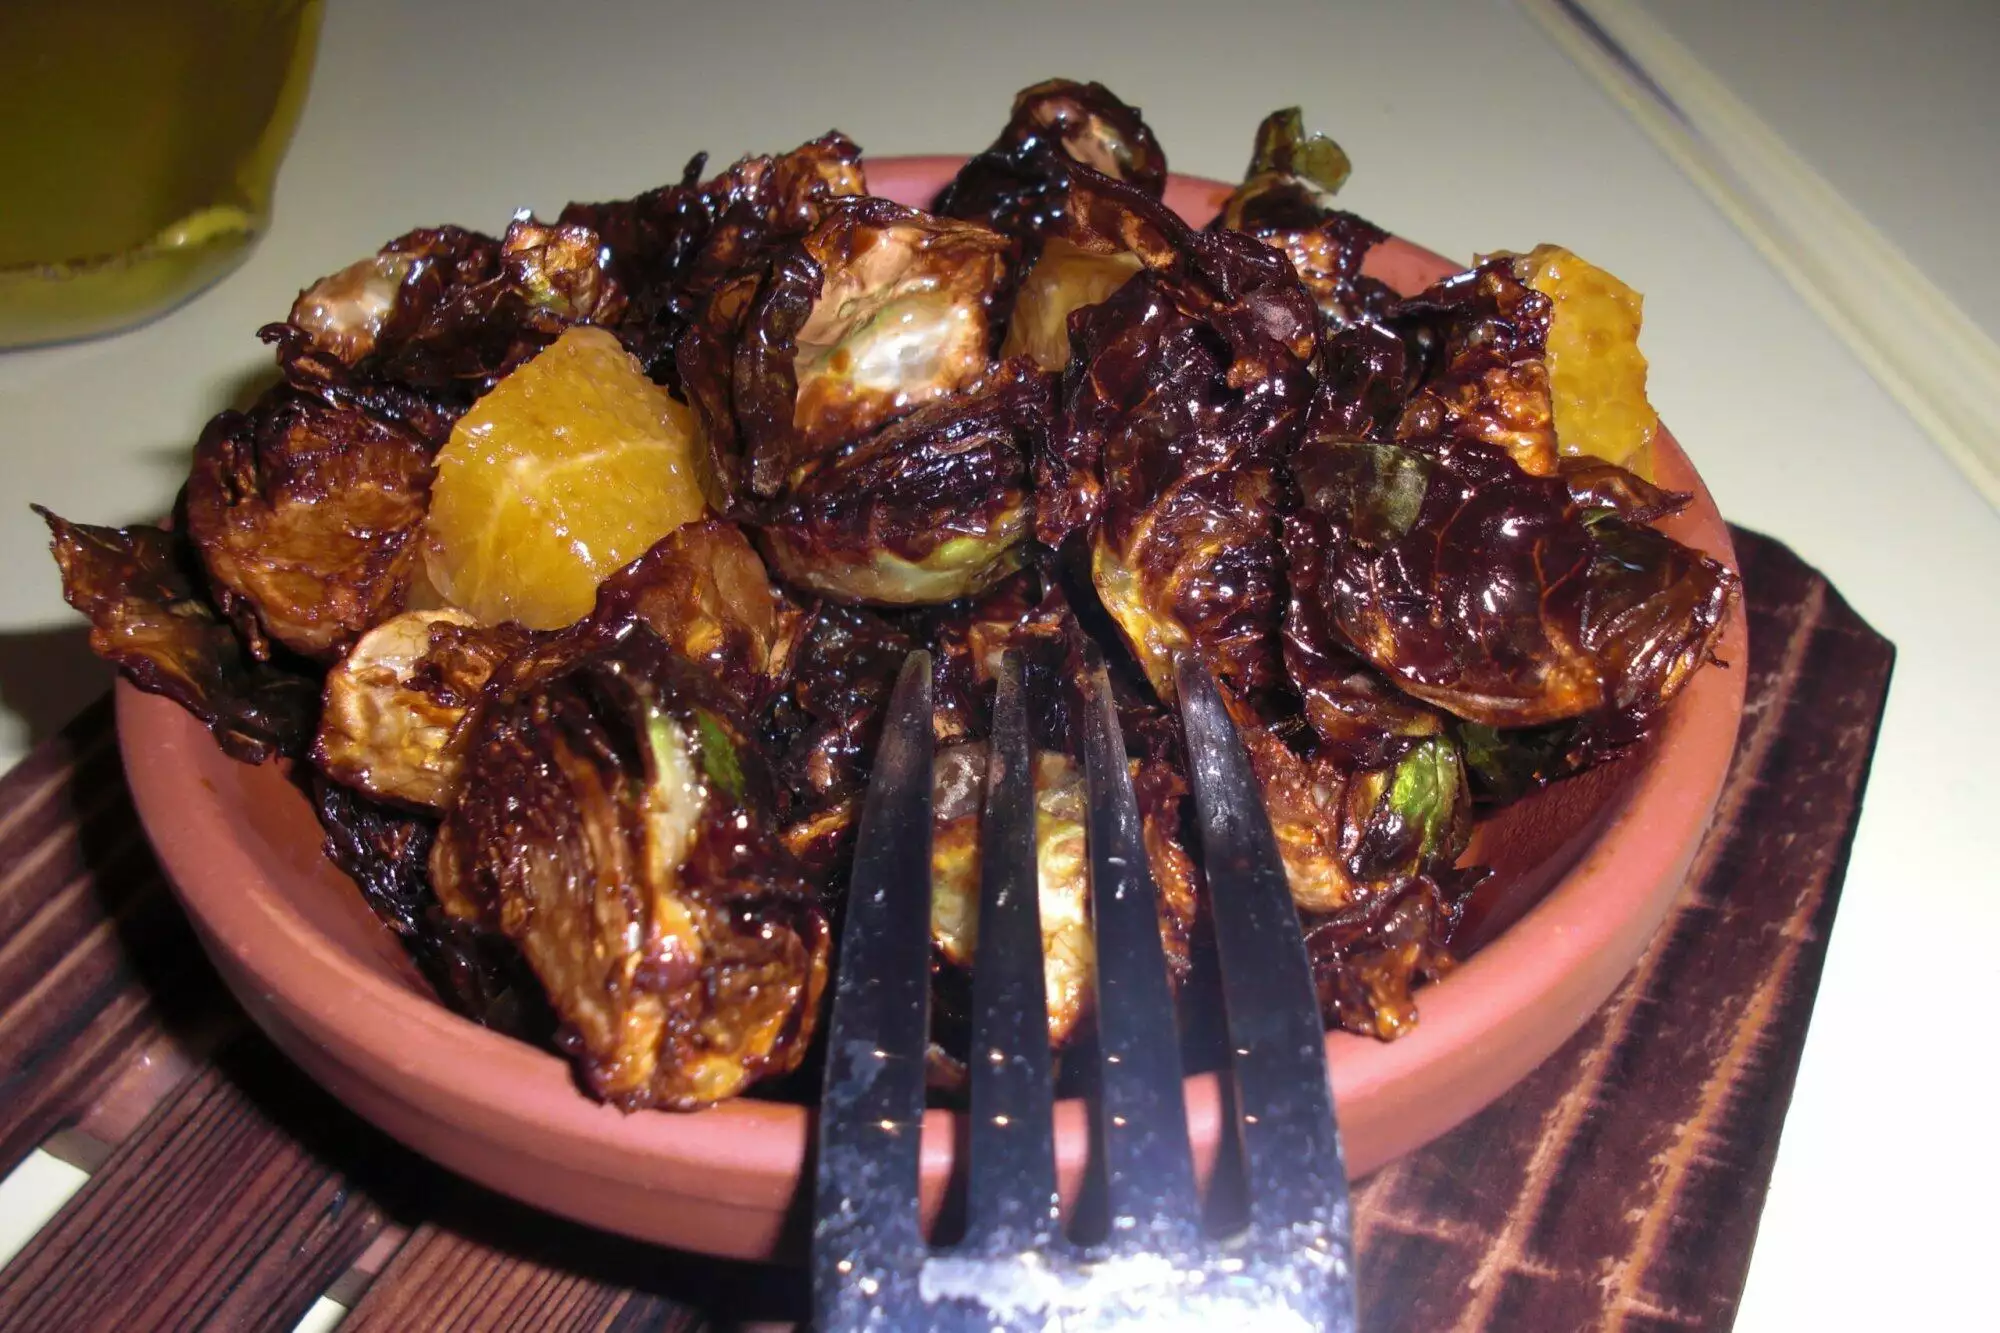 Brussels sprouts with orange and sweet soy